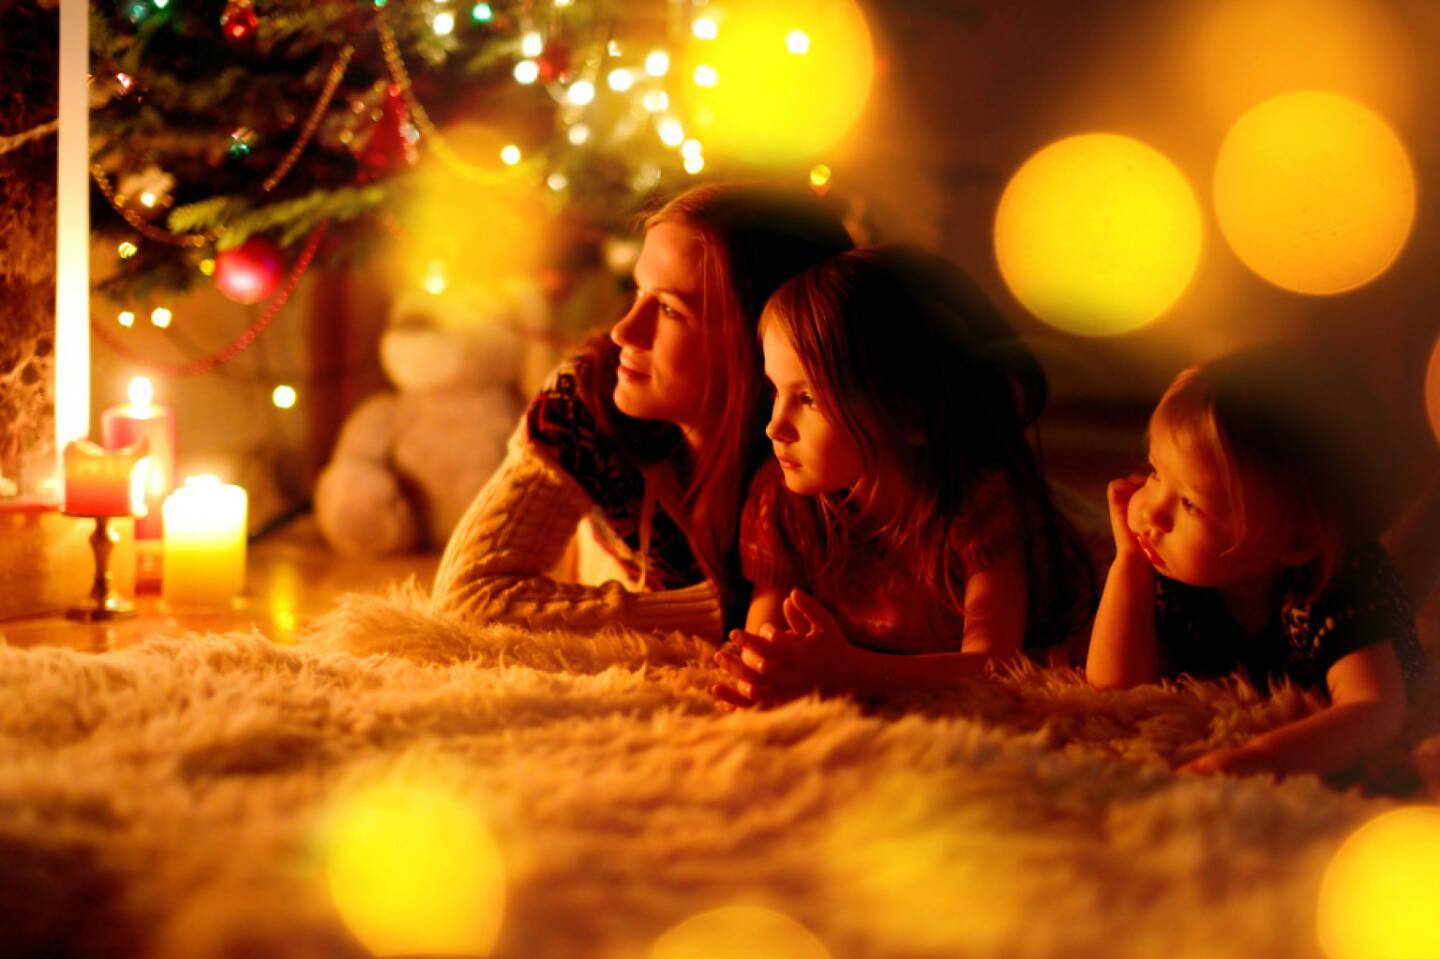 Weihnachten, Bescherung, Heiliger Abend, http://www.shutterstock.com/de/pic-215615716/stock-photo-young-mother-and-her-two-little-daughters-sitting-by-a-fireplace-in-a-cozy-dark-living-room-on.html